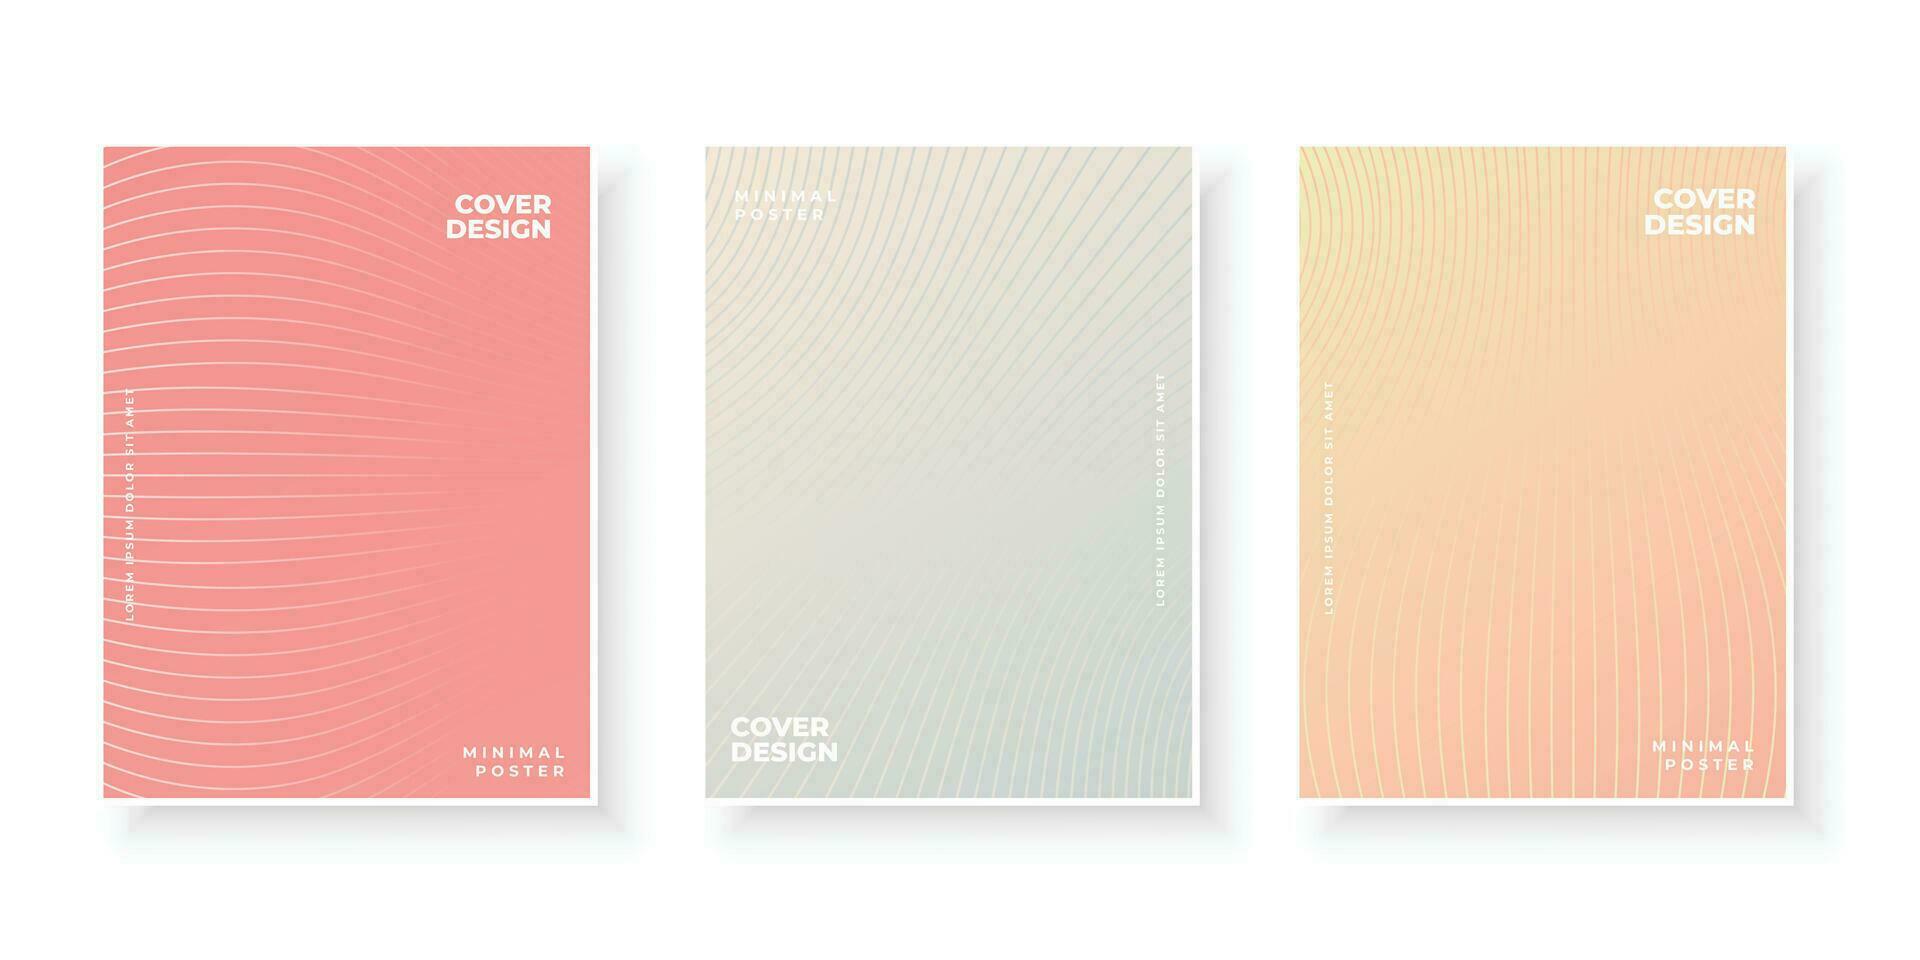 Colorful gradient covers pack with line pattern design set vector